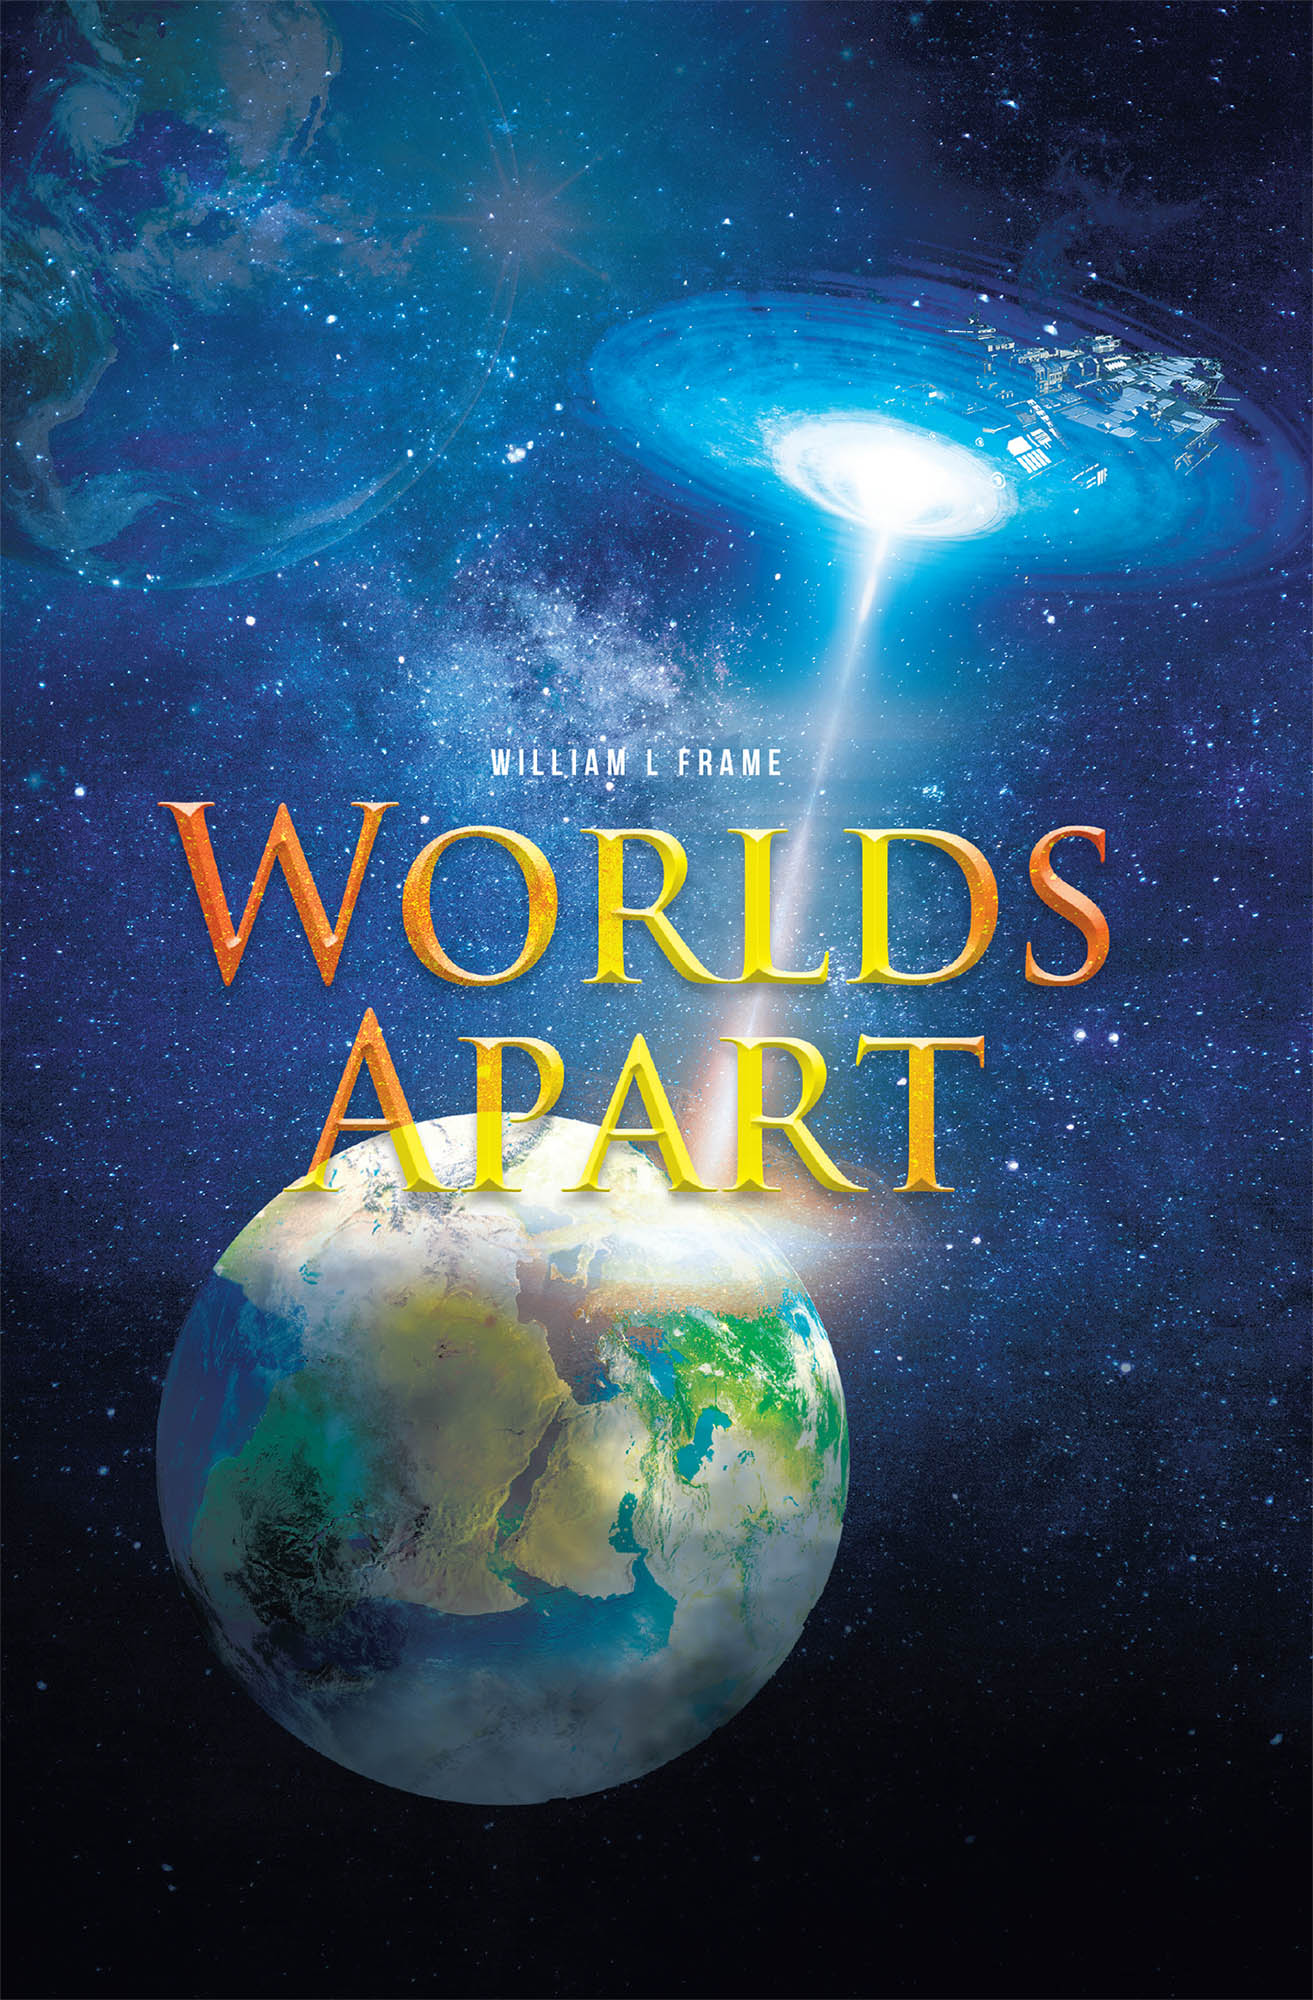 Worlds Apart Cover Image